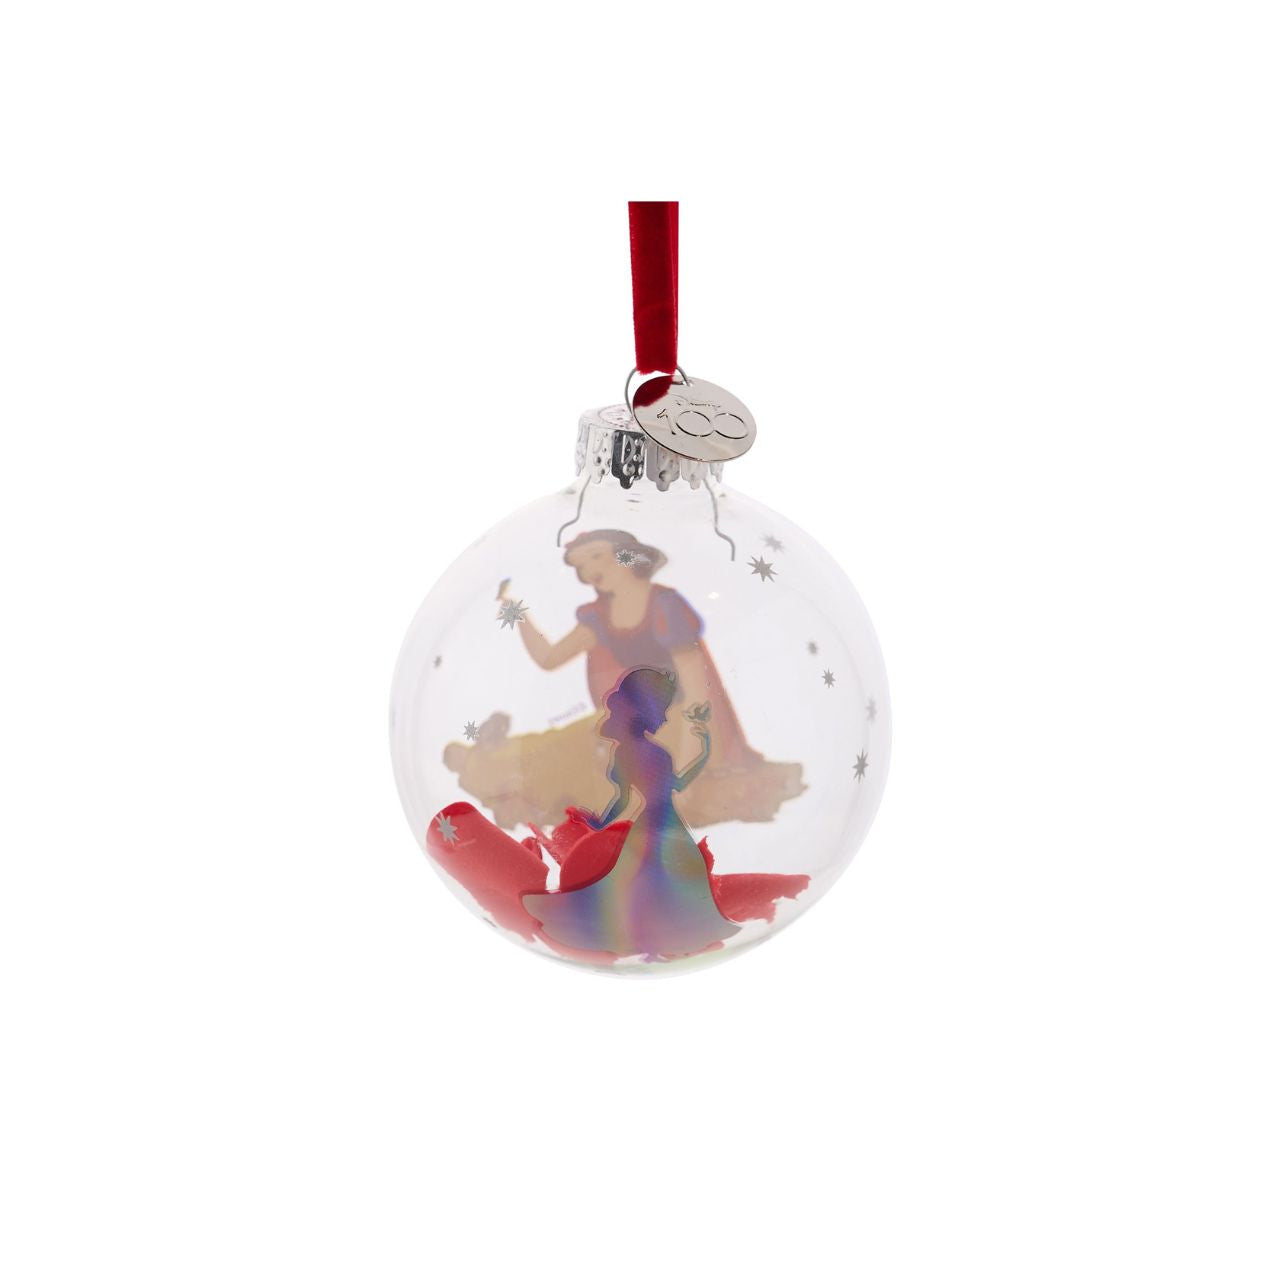 Disney 100th Anniversary Bauble - Snow White  A Snow White glass bauble from Disney 100 by DISNEY.  This limited edition tree decoration captures the true magic of Disney on its centenary and can be enjoyed by fans of all ages at Christmas.